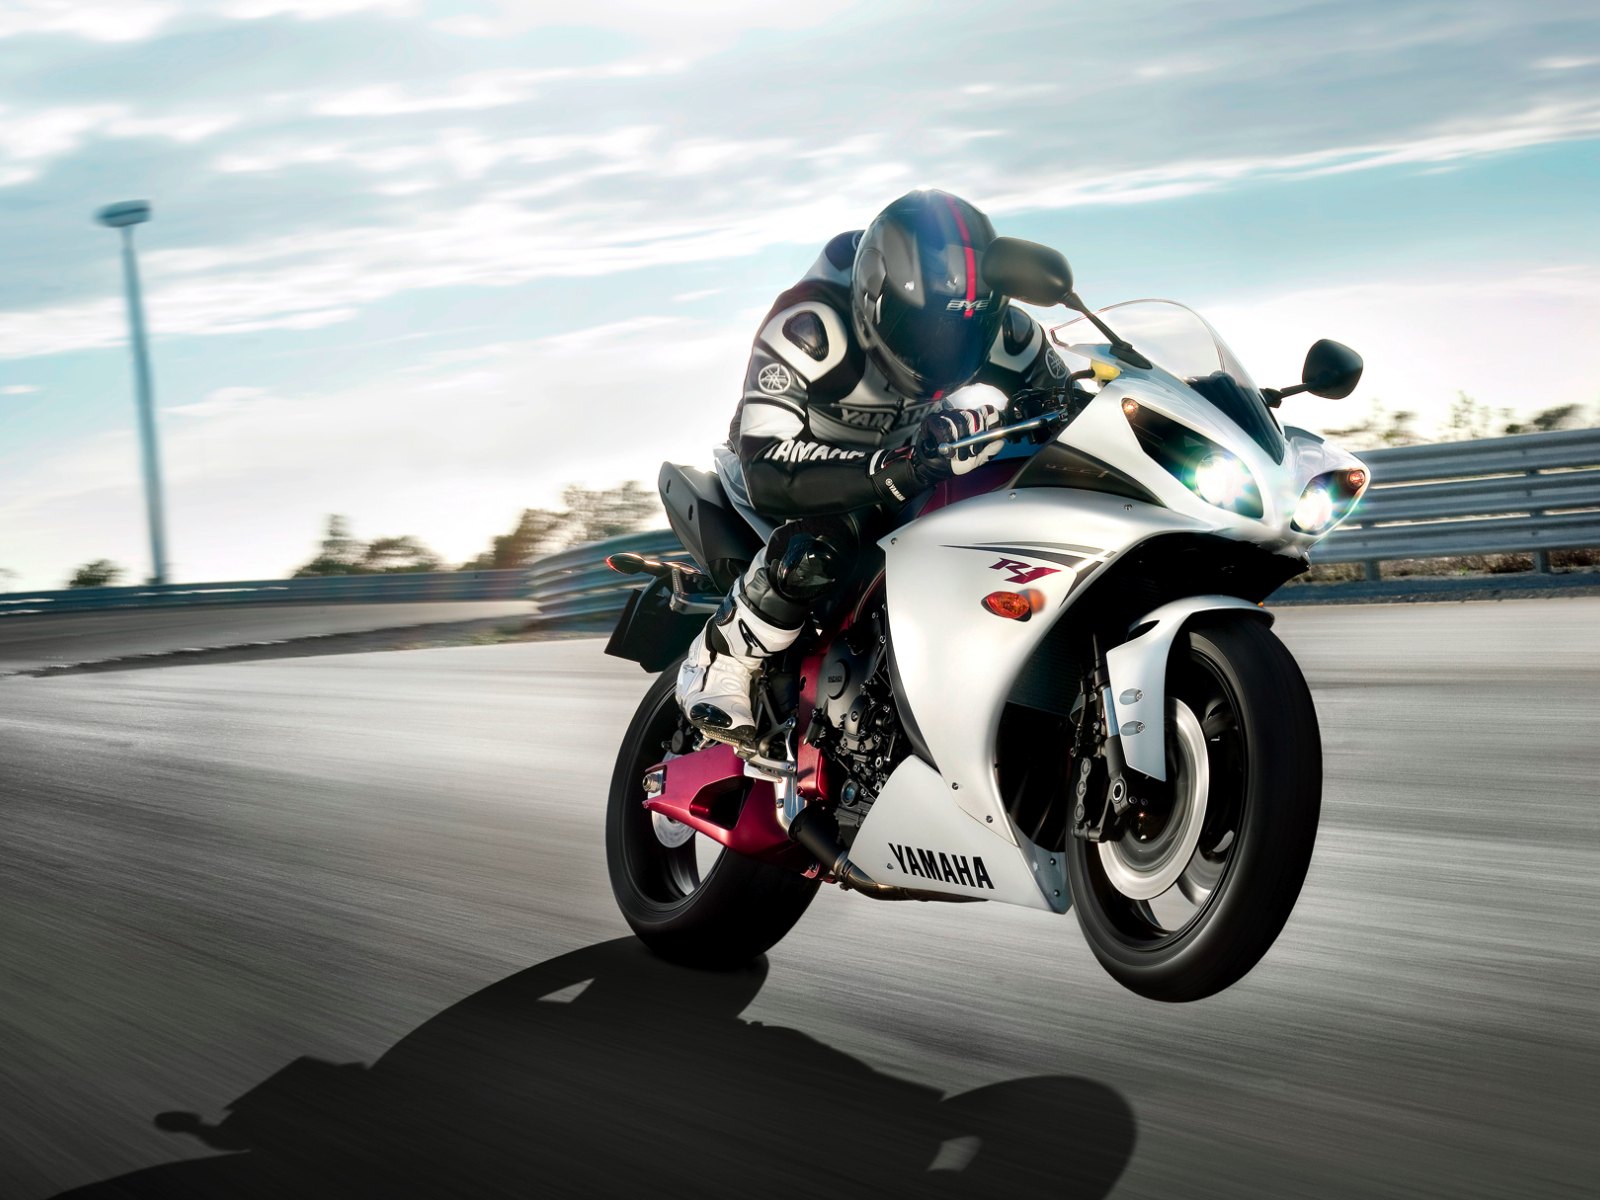 Yamaha R1 Pictures  Download Free Images on Unsplash